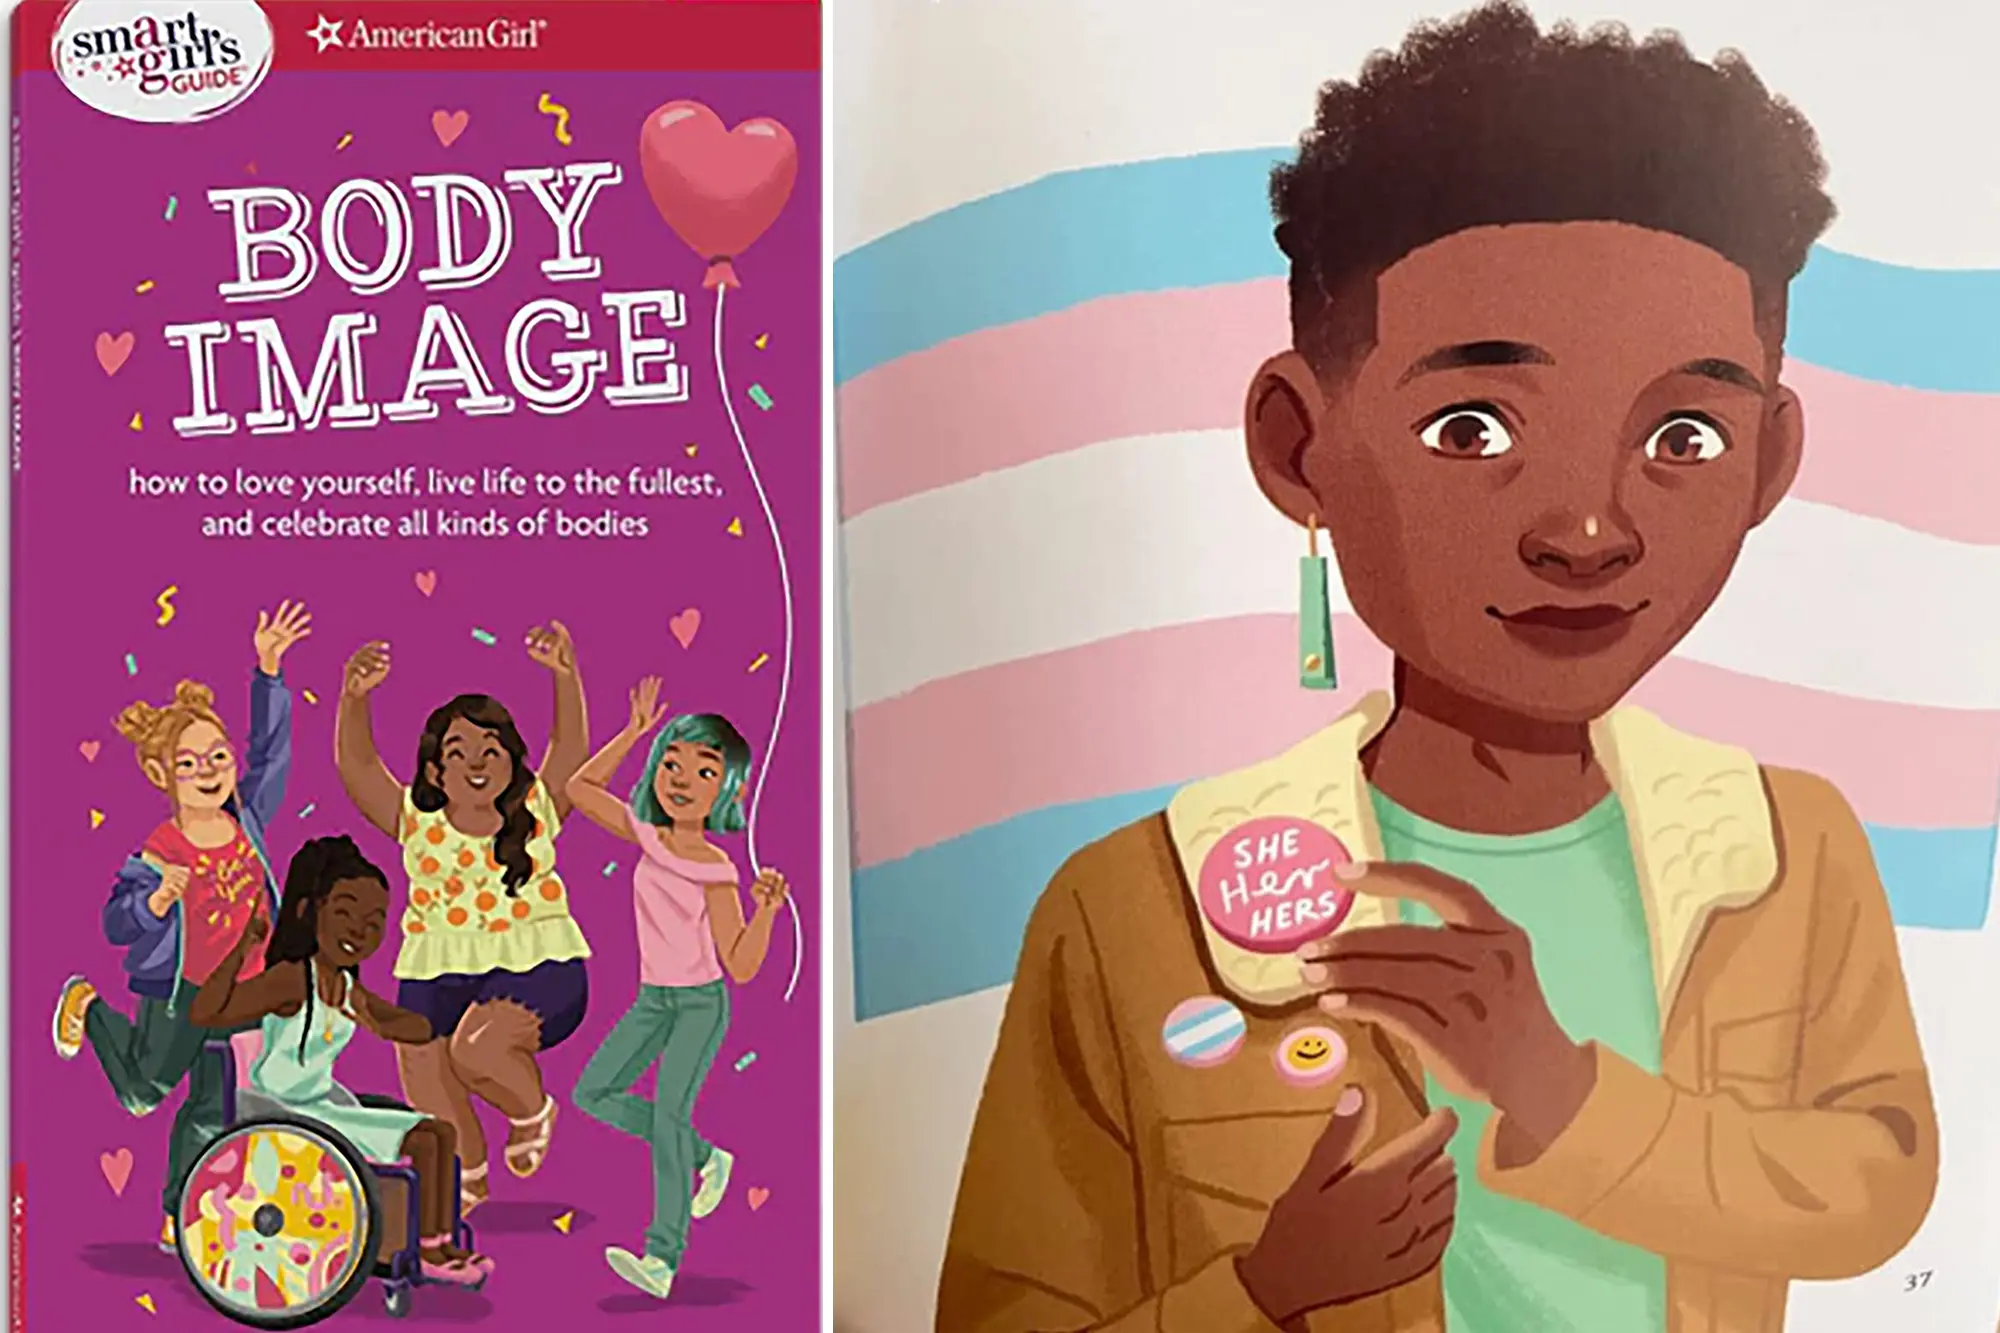 American Girl takes wokeness to a new level with ‘gender transition’ book for 3-12 year-olds